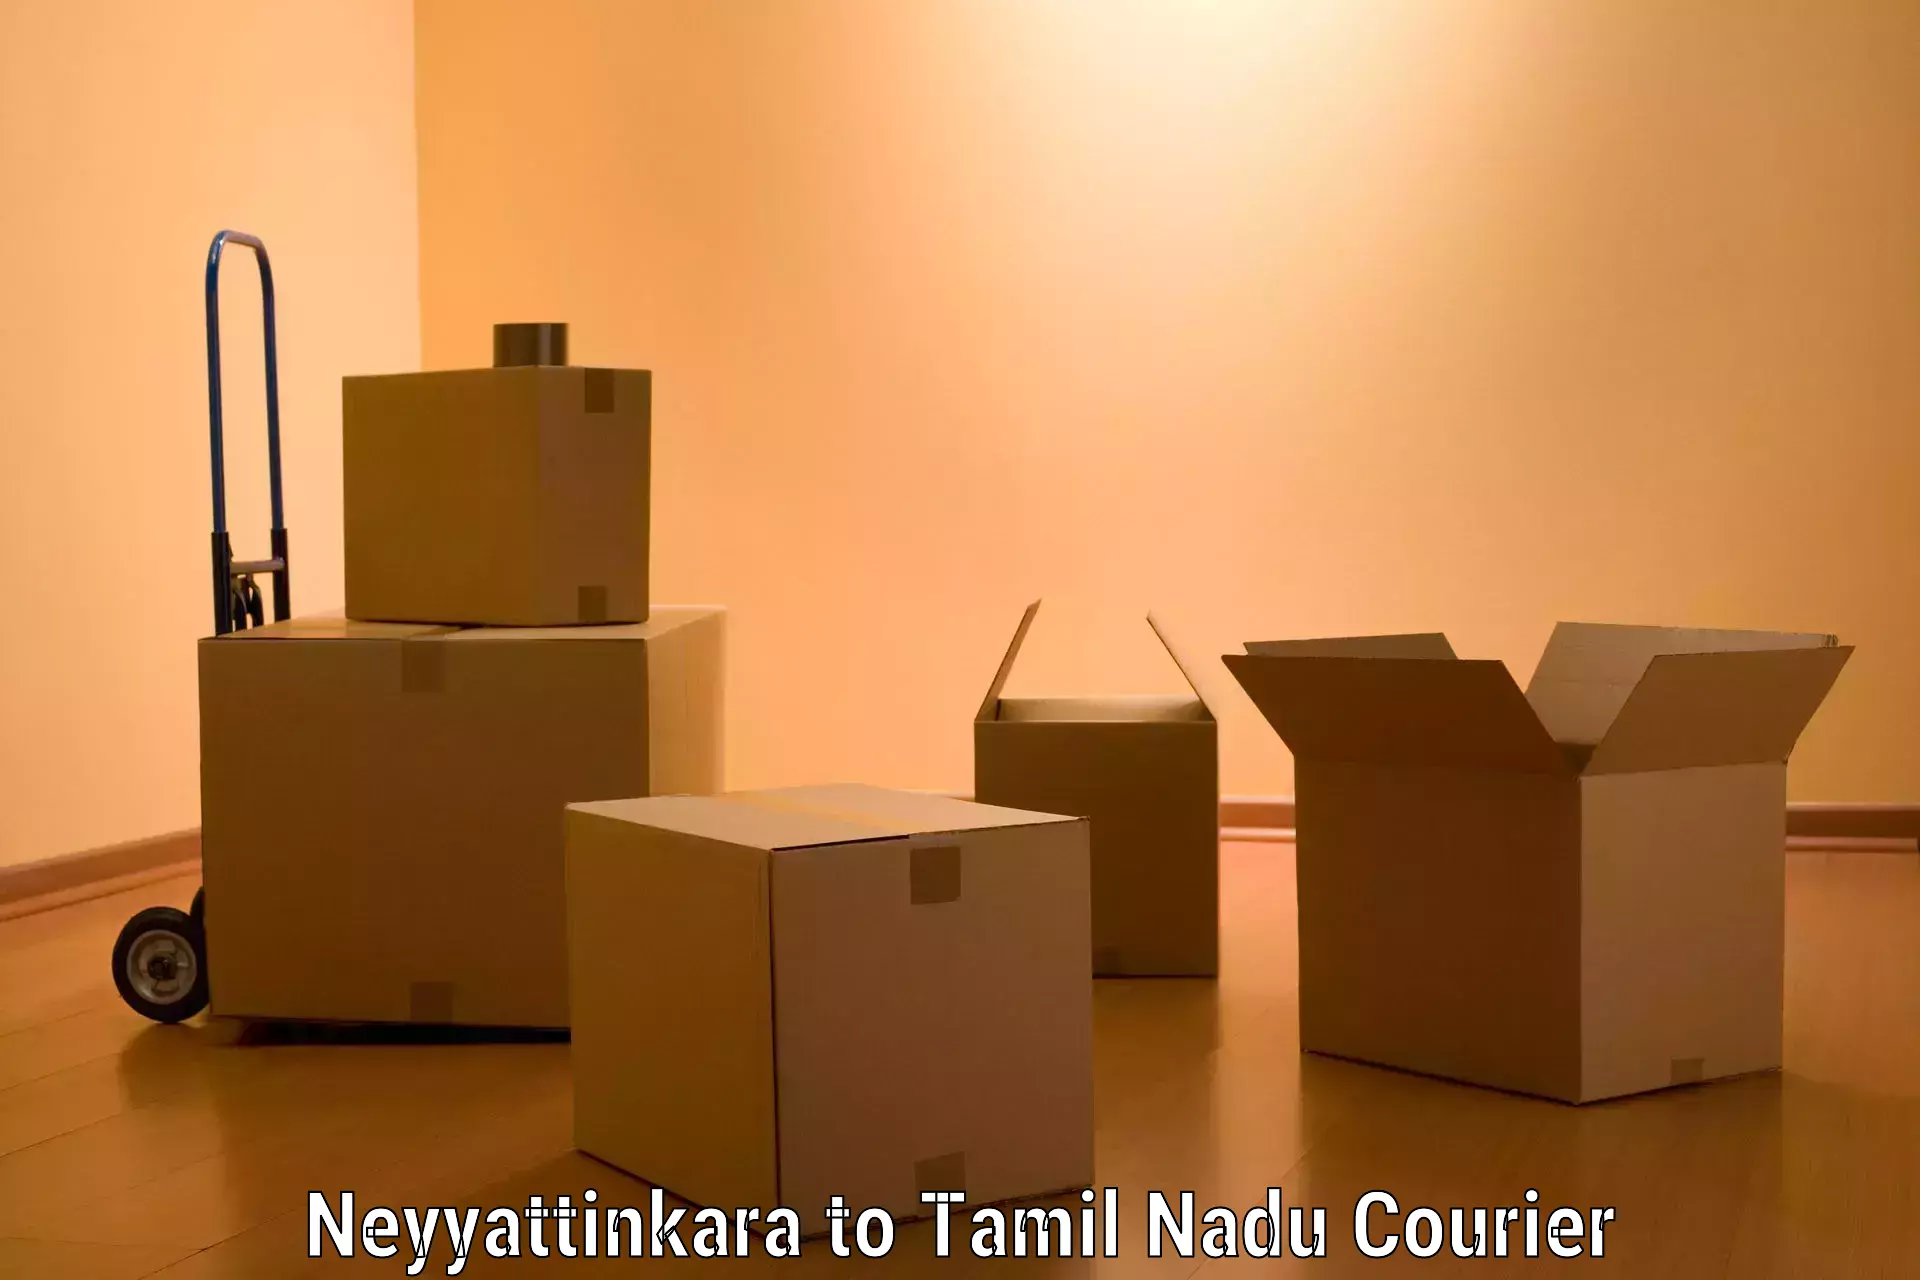 Professional home movers Neyyattinkara to Vellore Institute of Technology